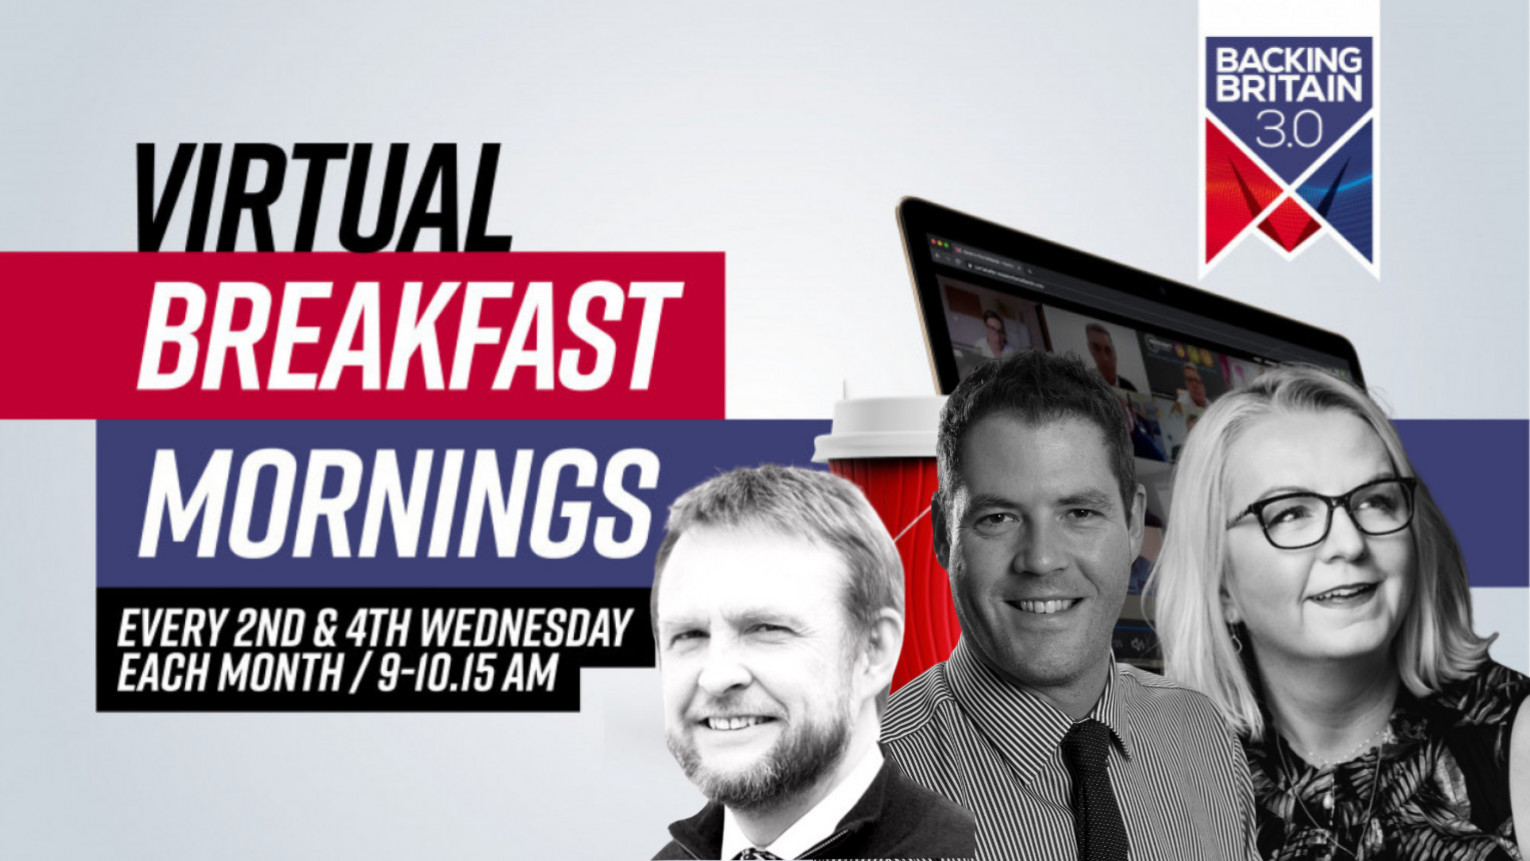 Backing Britain Virtual Breakfast Morning with Total Control Pro, Cadspec and Alwayse Engineering